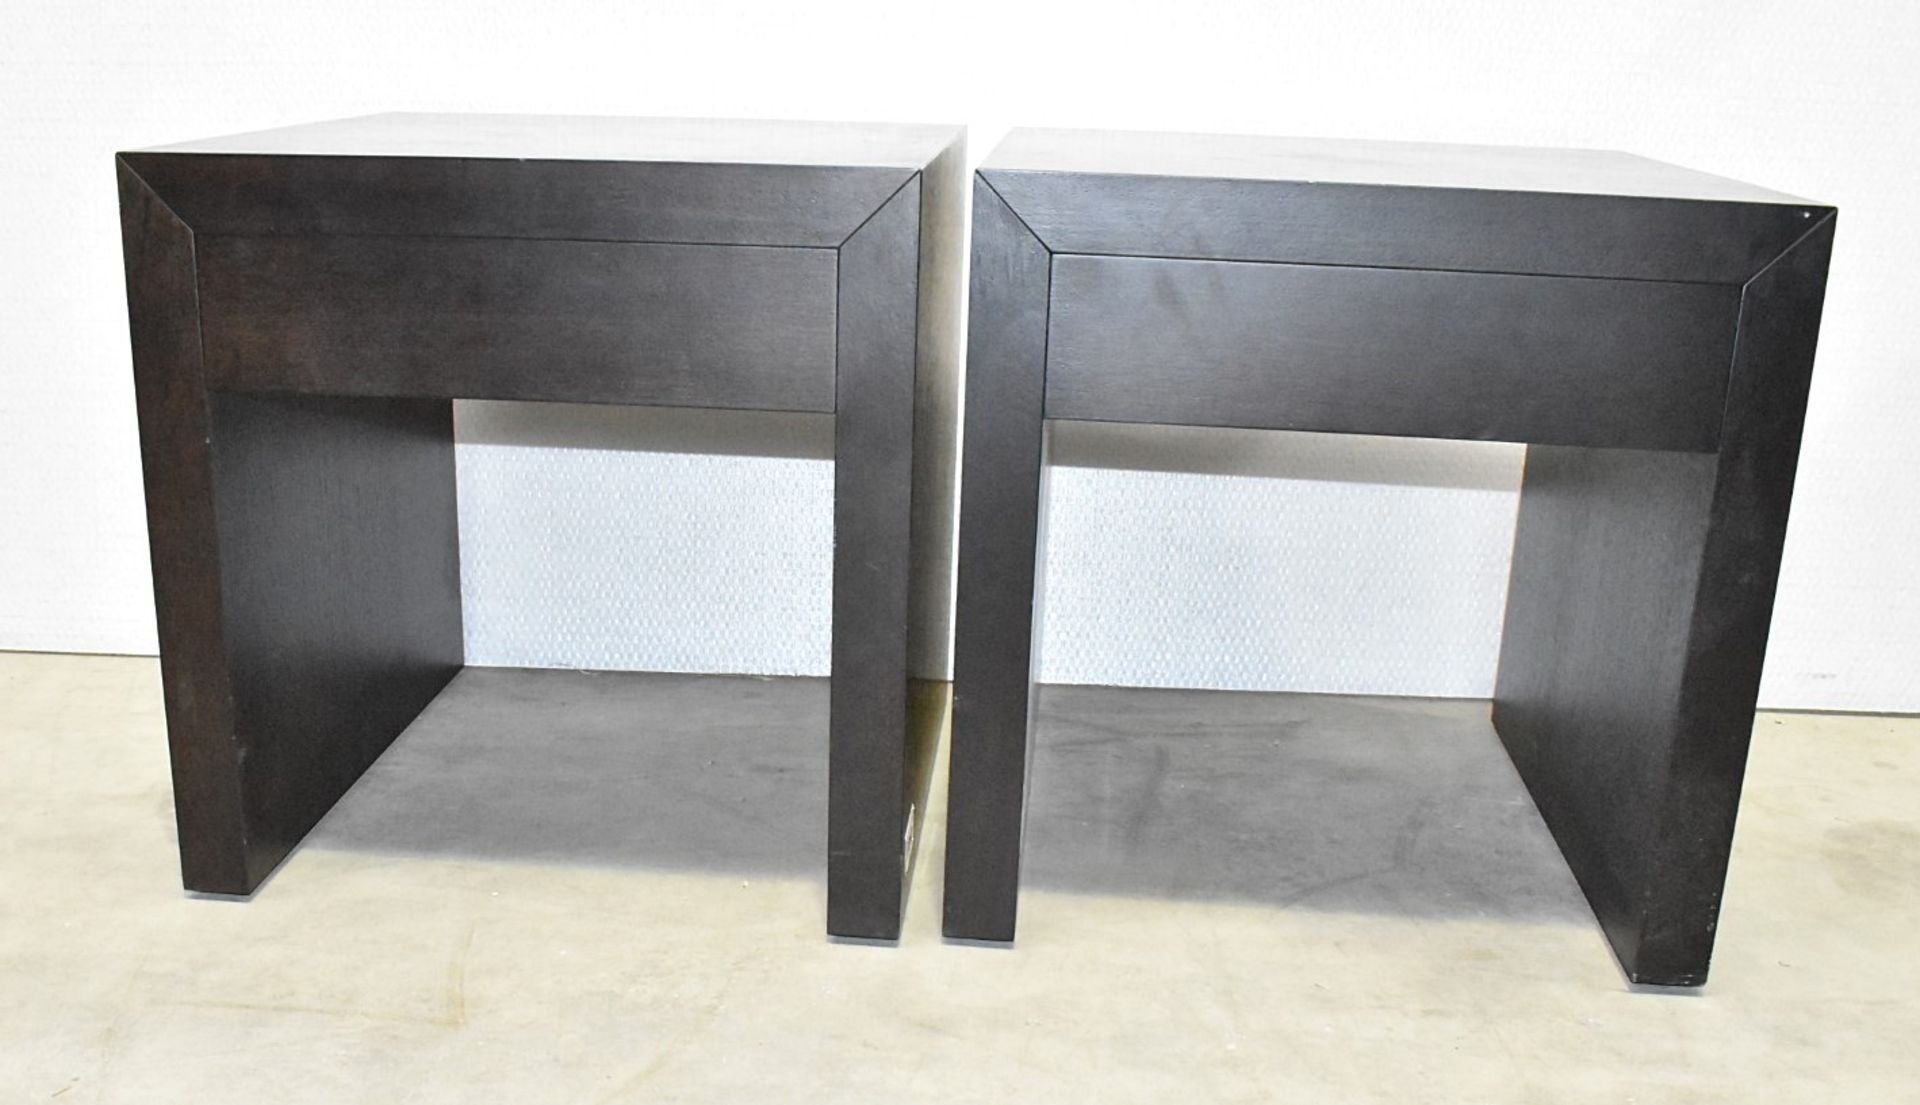 Pair of FENDI Modern Designer Wooden Bedside Cabinets Featuring Suede-style Lined 1-Drawer Storage - Image 14 of 15